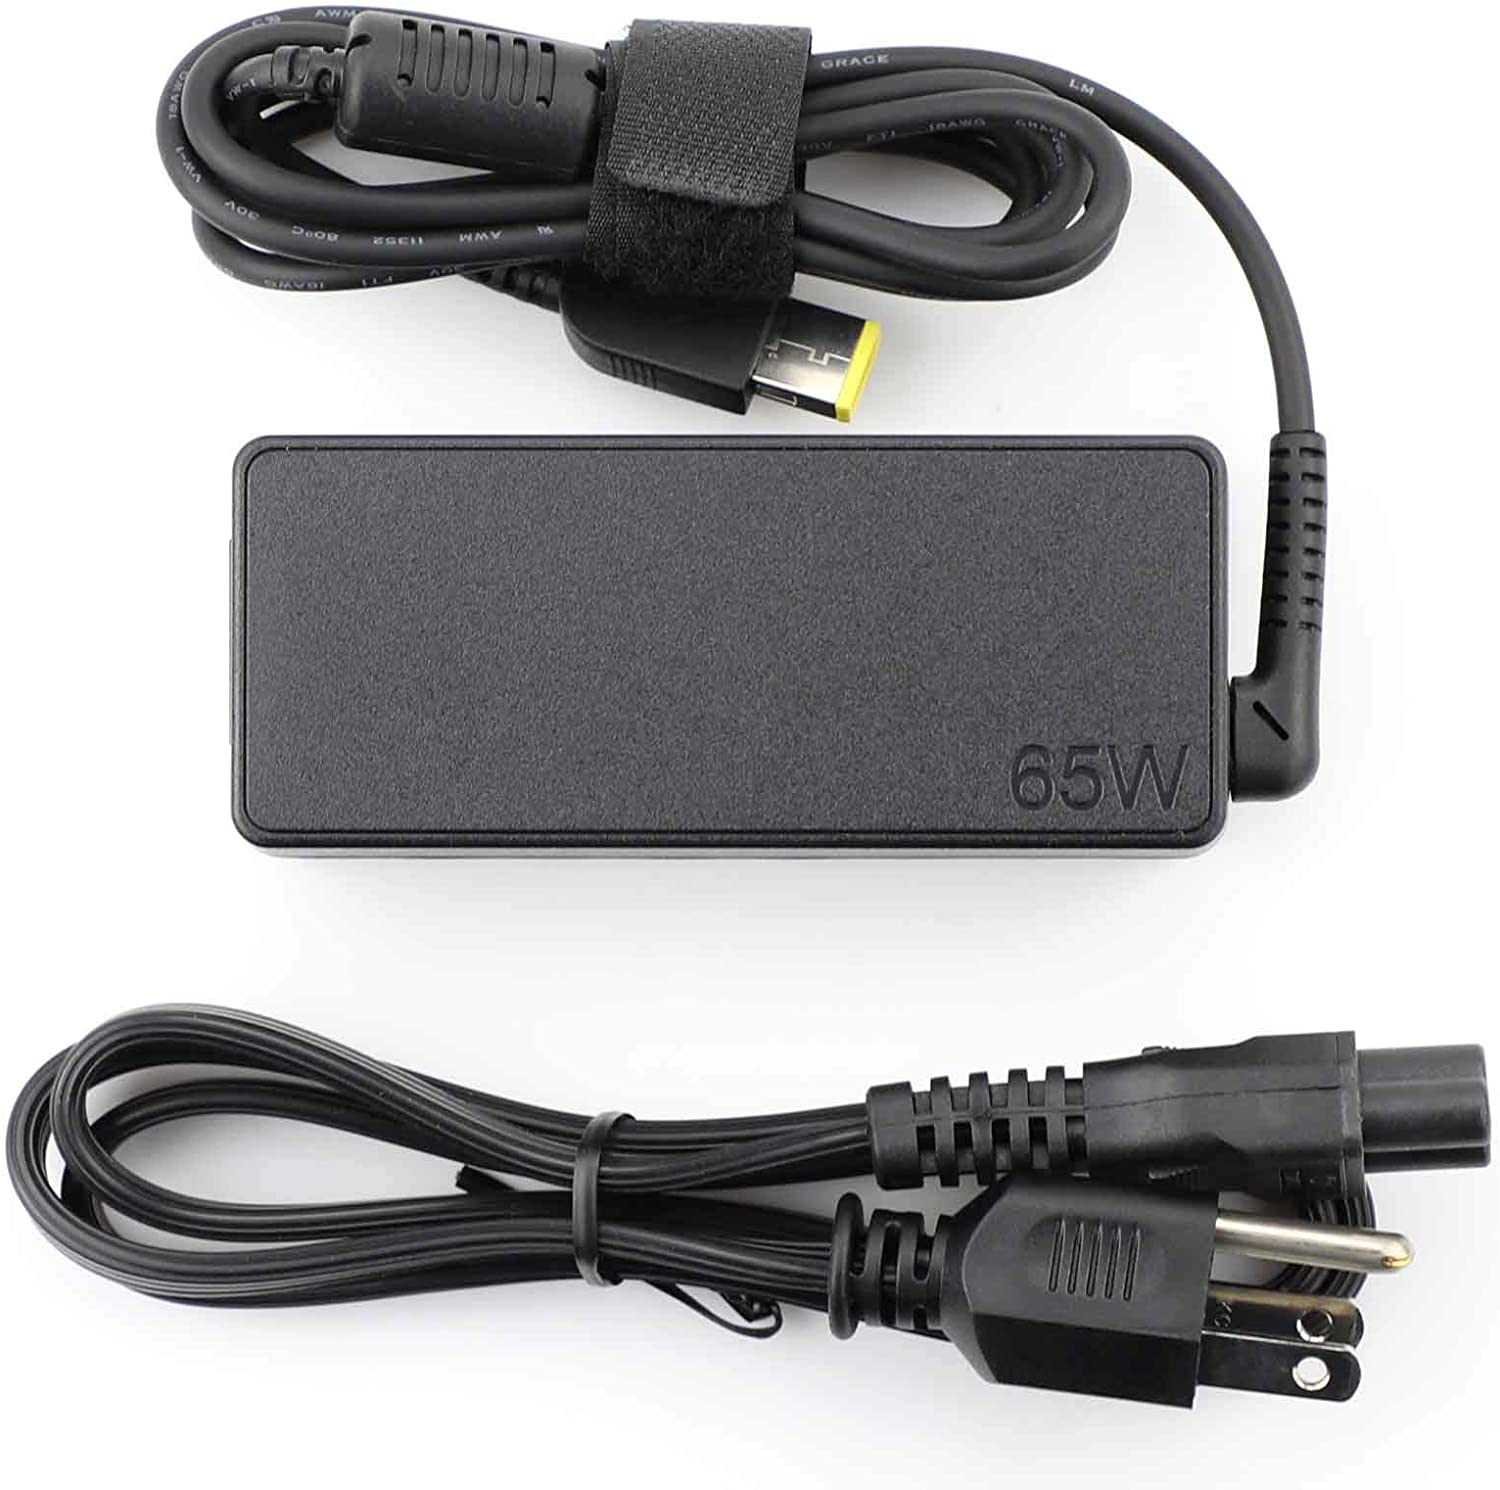 UpBright???? Original OEM Lenovo 20V 3.25A 65W AC Adapter Power Supply Cord Charger For Lenovo IdeaPad Yoga 13 Series Ultrabook IdeaPad Yoga 13 2191 0B47455, Lenovo IdeaPad Yoga 13 21912XU - image 1 of 5